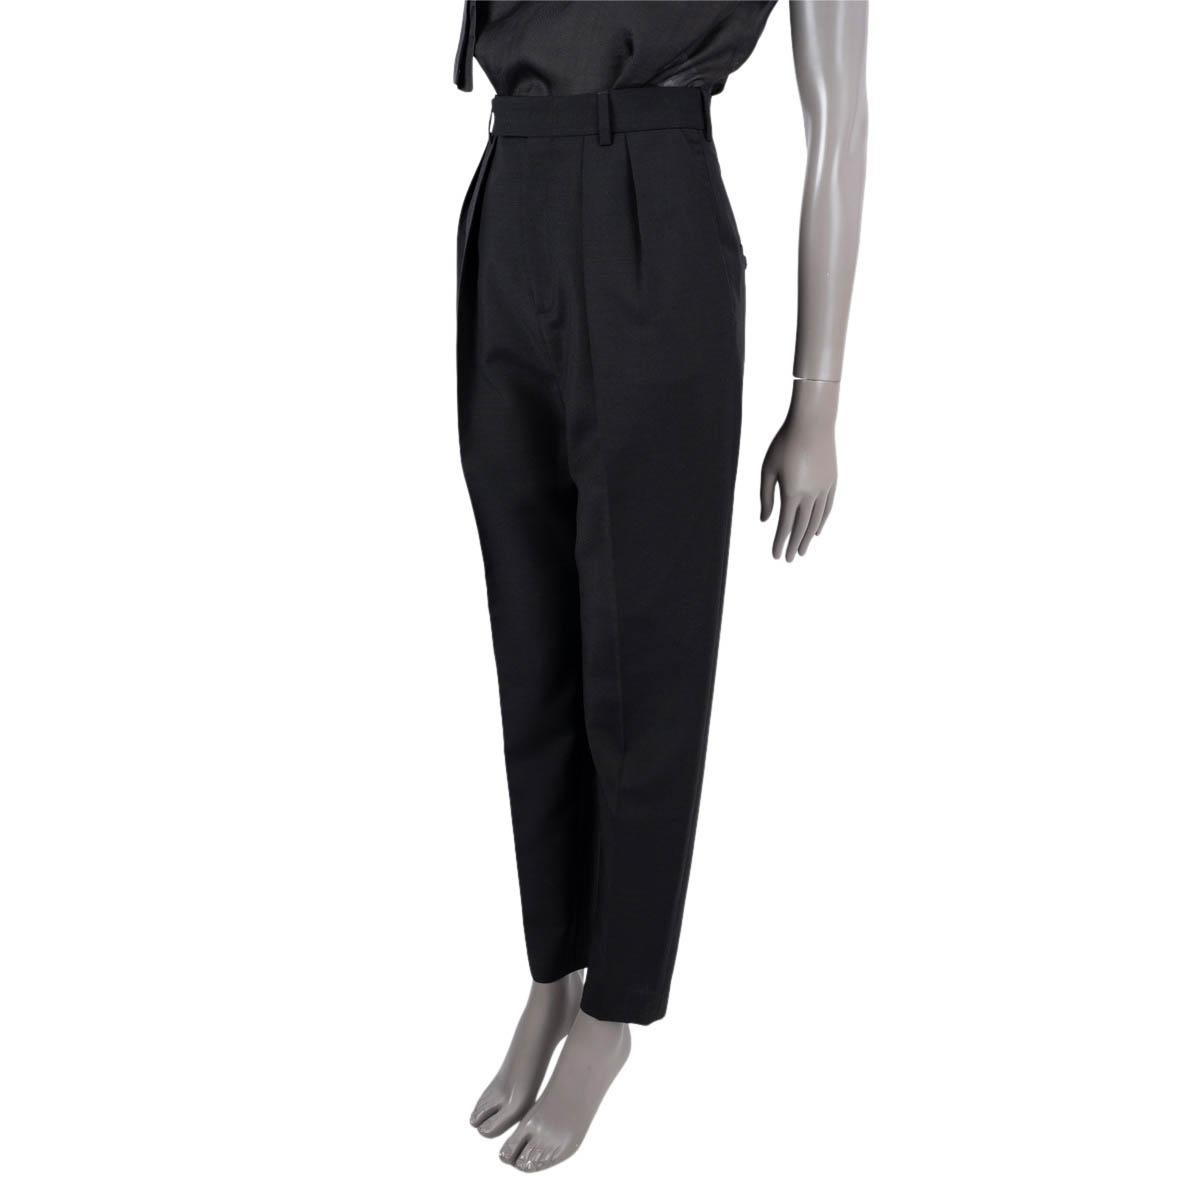 100% authentic Celine double pleated  suit pants in black wool (75%) and mohair (25%). Features belt loops two side and back pockets. Close on the front with with a concealed zipper, button and hook fastener. Unlined. Have been worn and are in